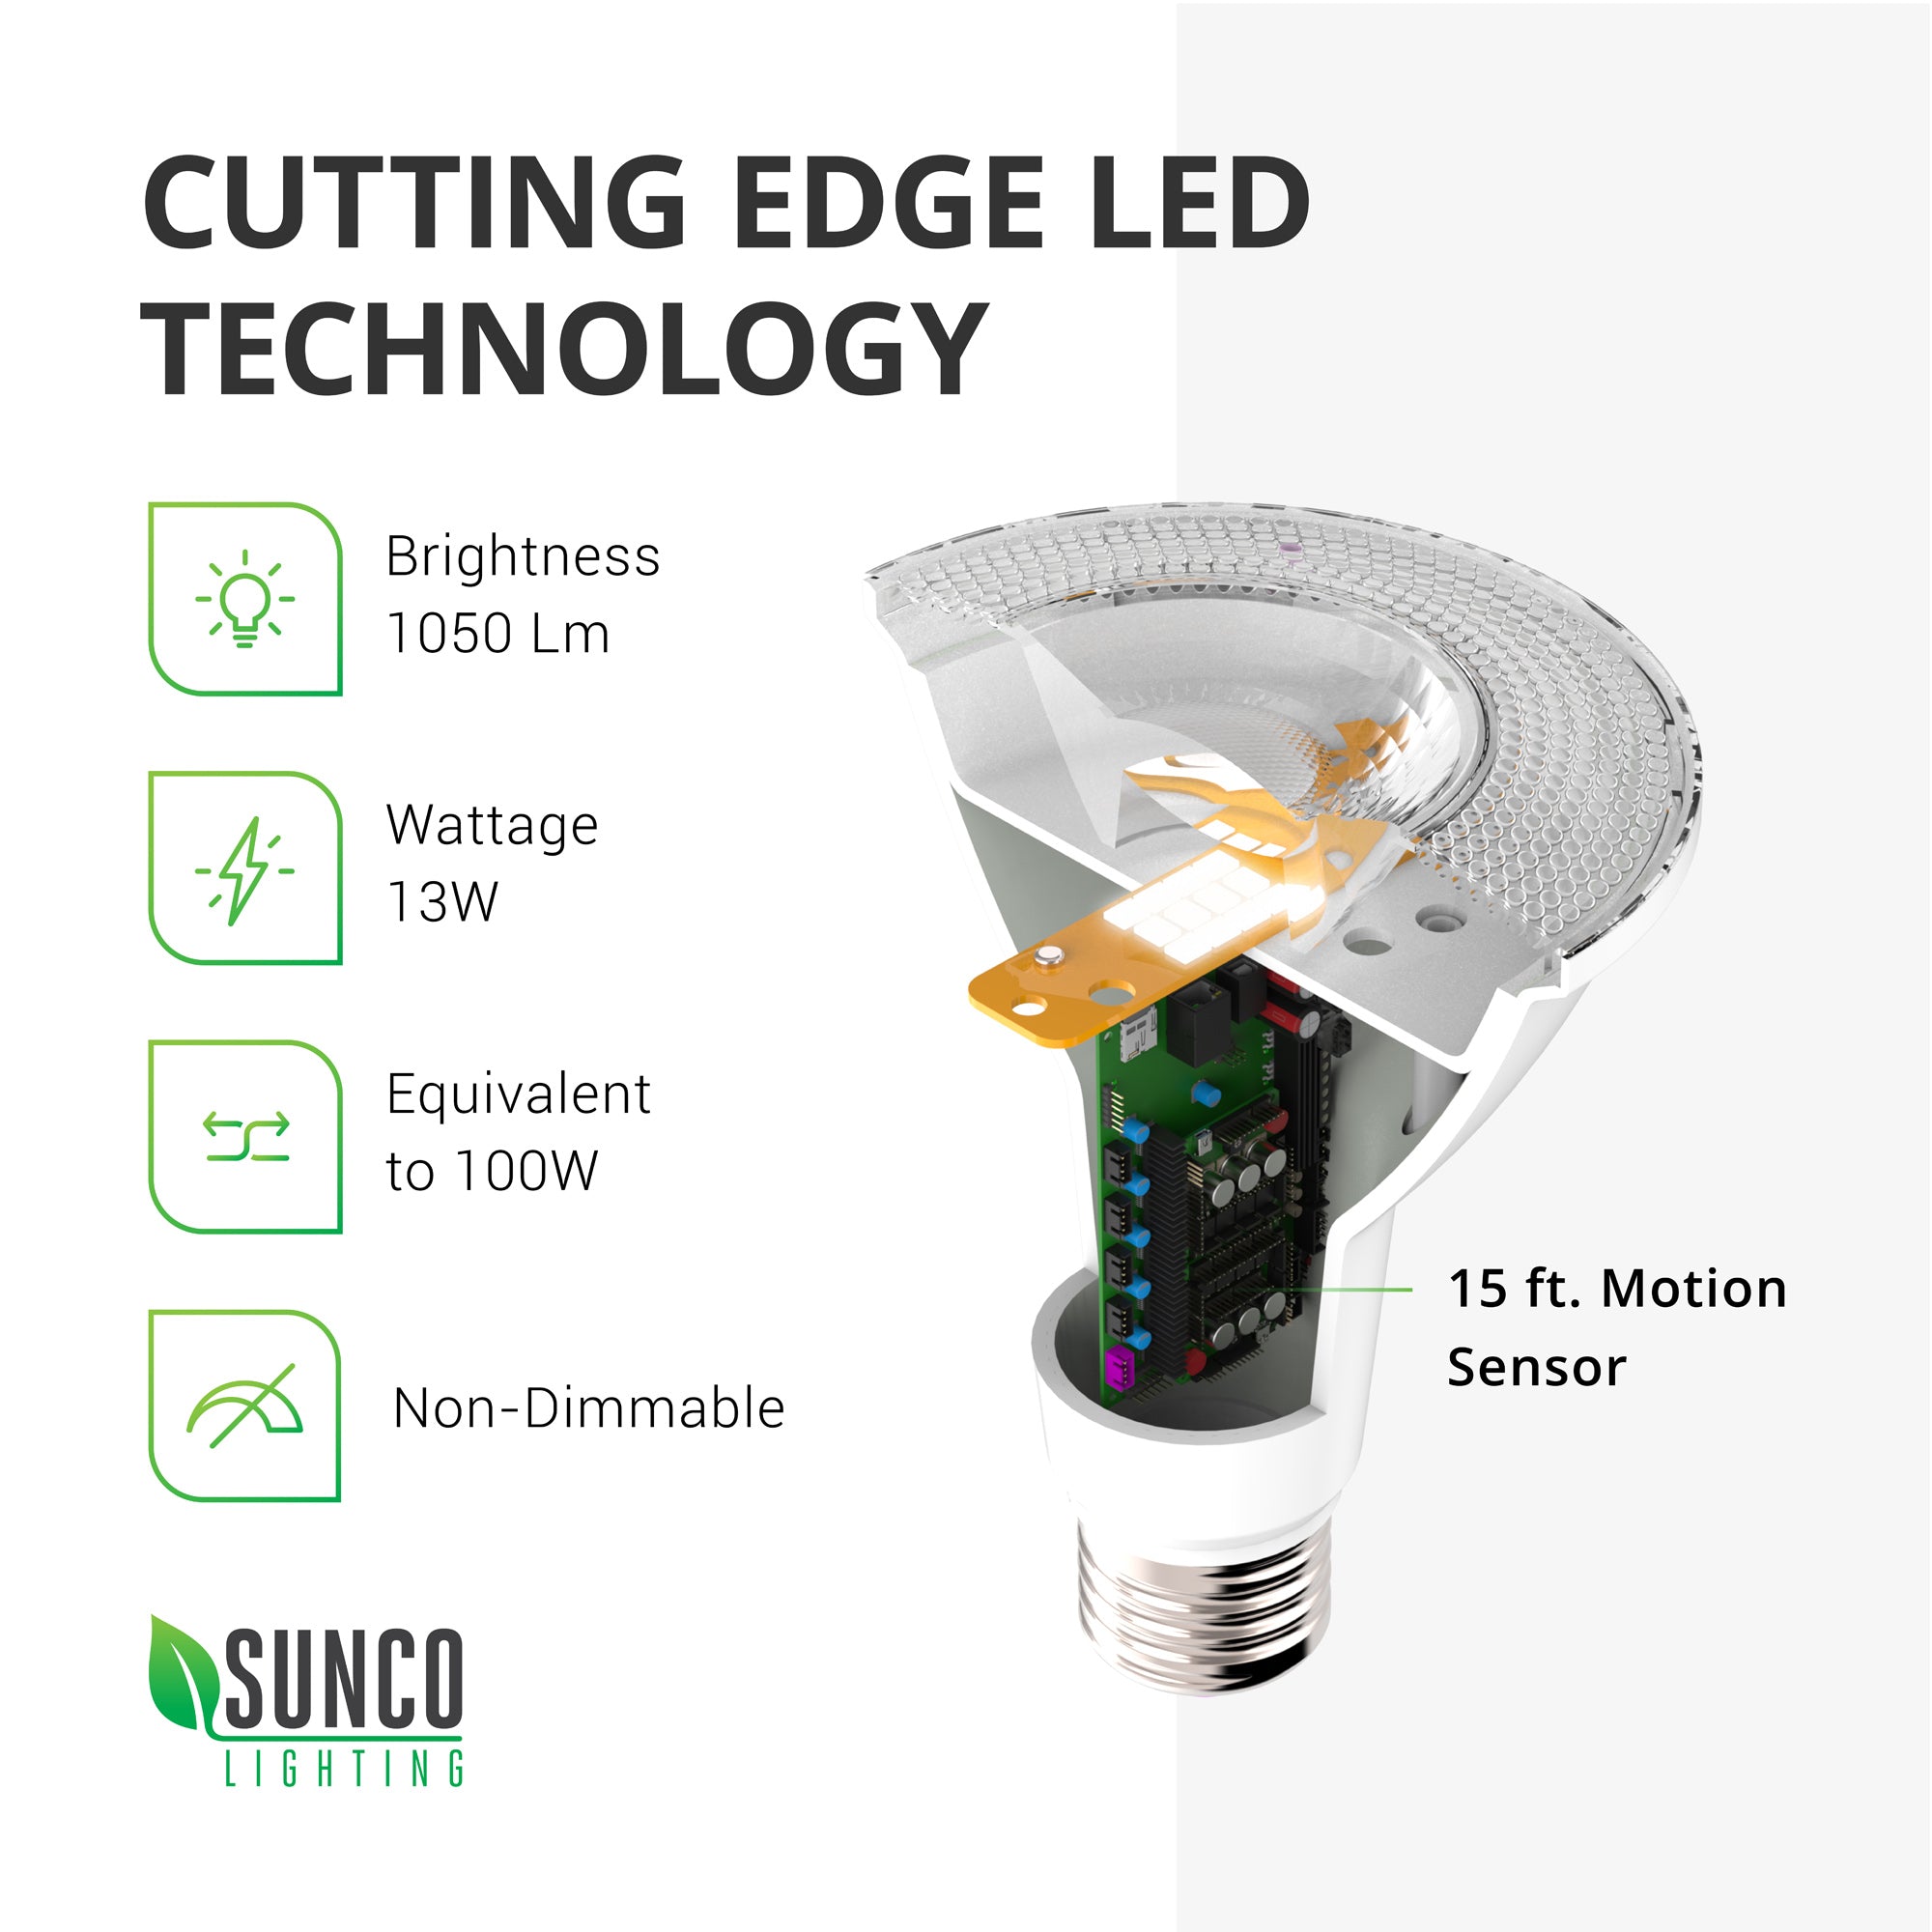 The motion activated PAR38 LED Bulb offers cutting edge LED technology. With 1050 lumens of bright light, this 13W LED is a 100W equivalent. It is non-dimmable. Image shows a cutaway of the bulb with its LED board and points out the motion sensor with its range of 15ft sensitivity and motion detection.